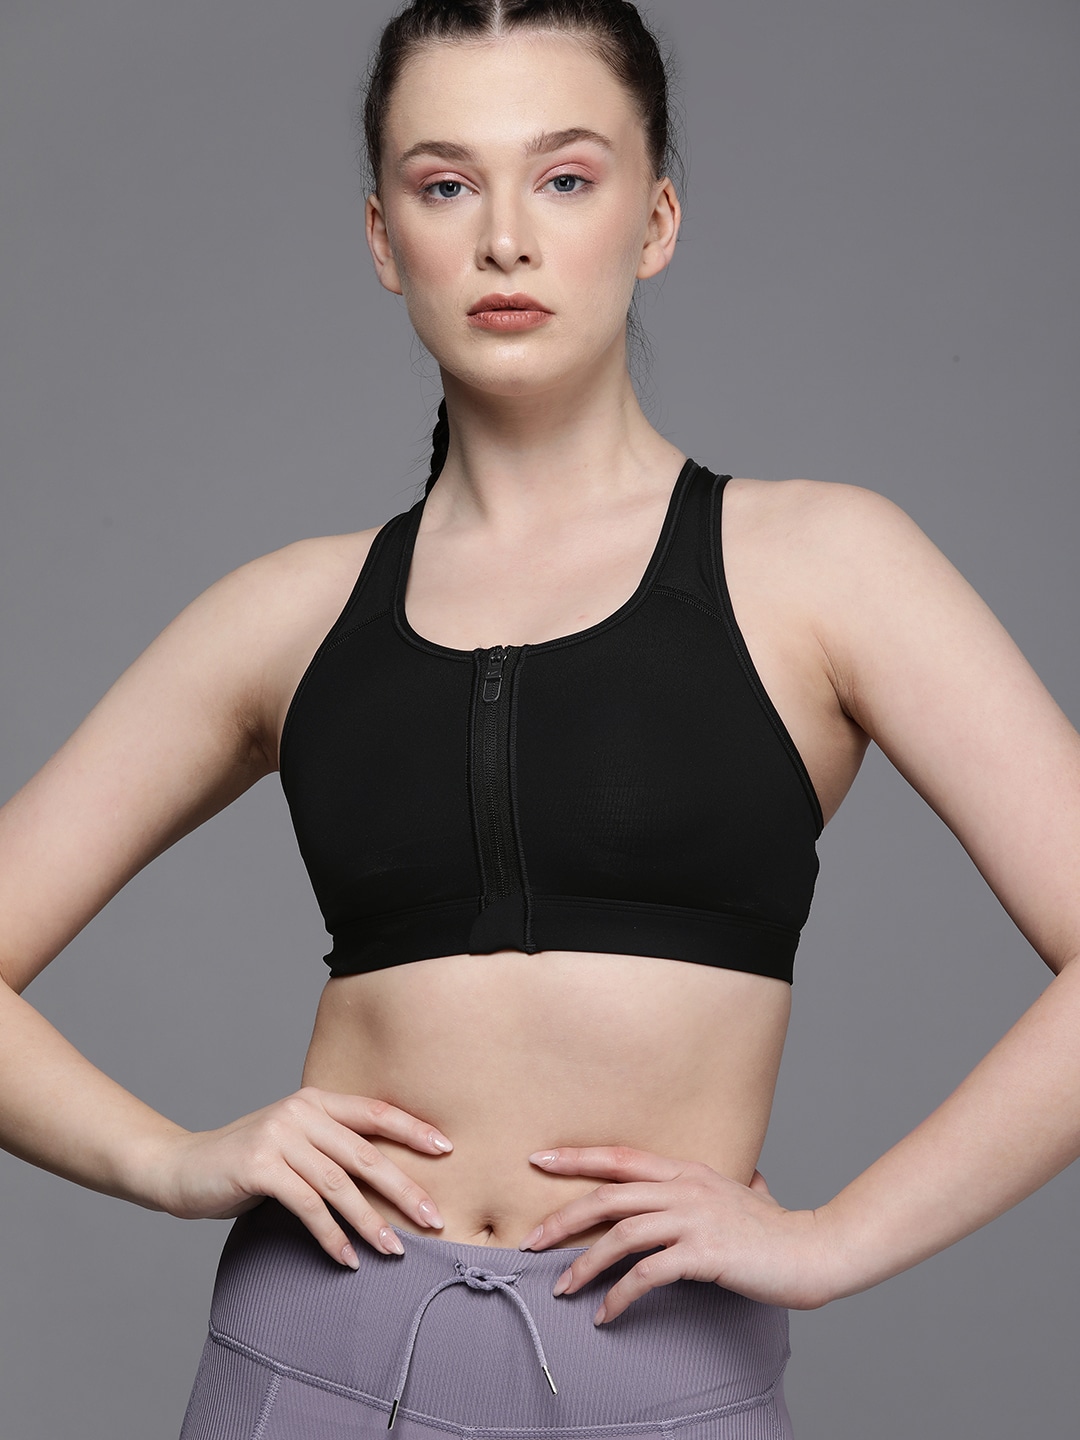 Nike Black Dri-FIT Swoosh Zip-Front Medium-Support Workout Bra - Lightly Padded Price in India